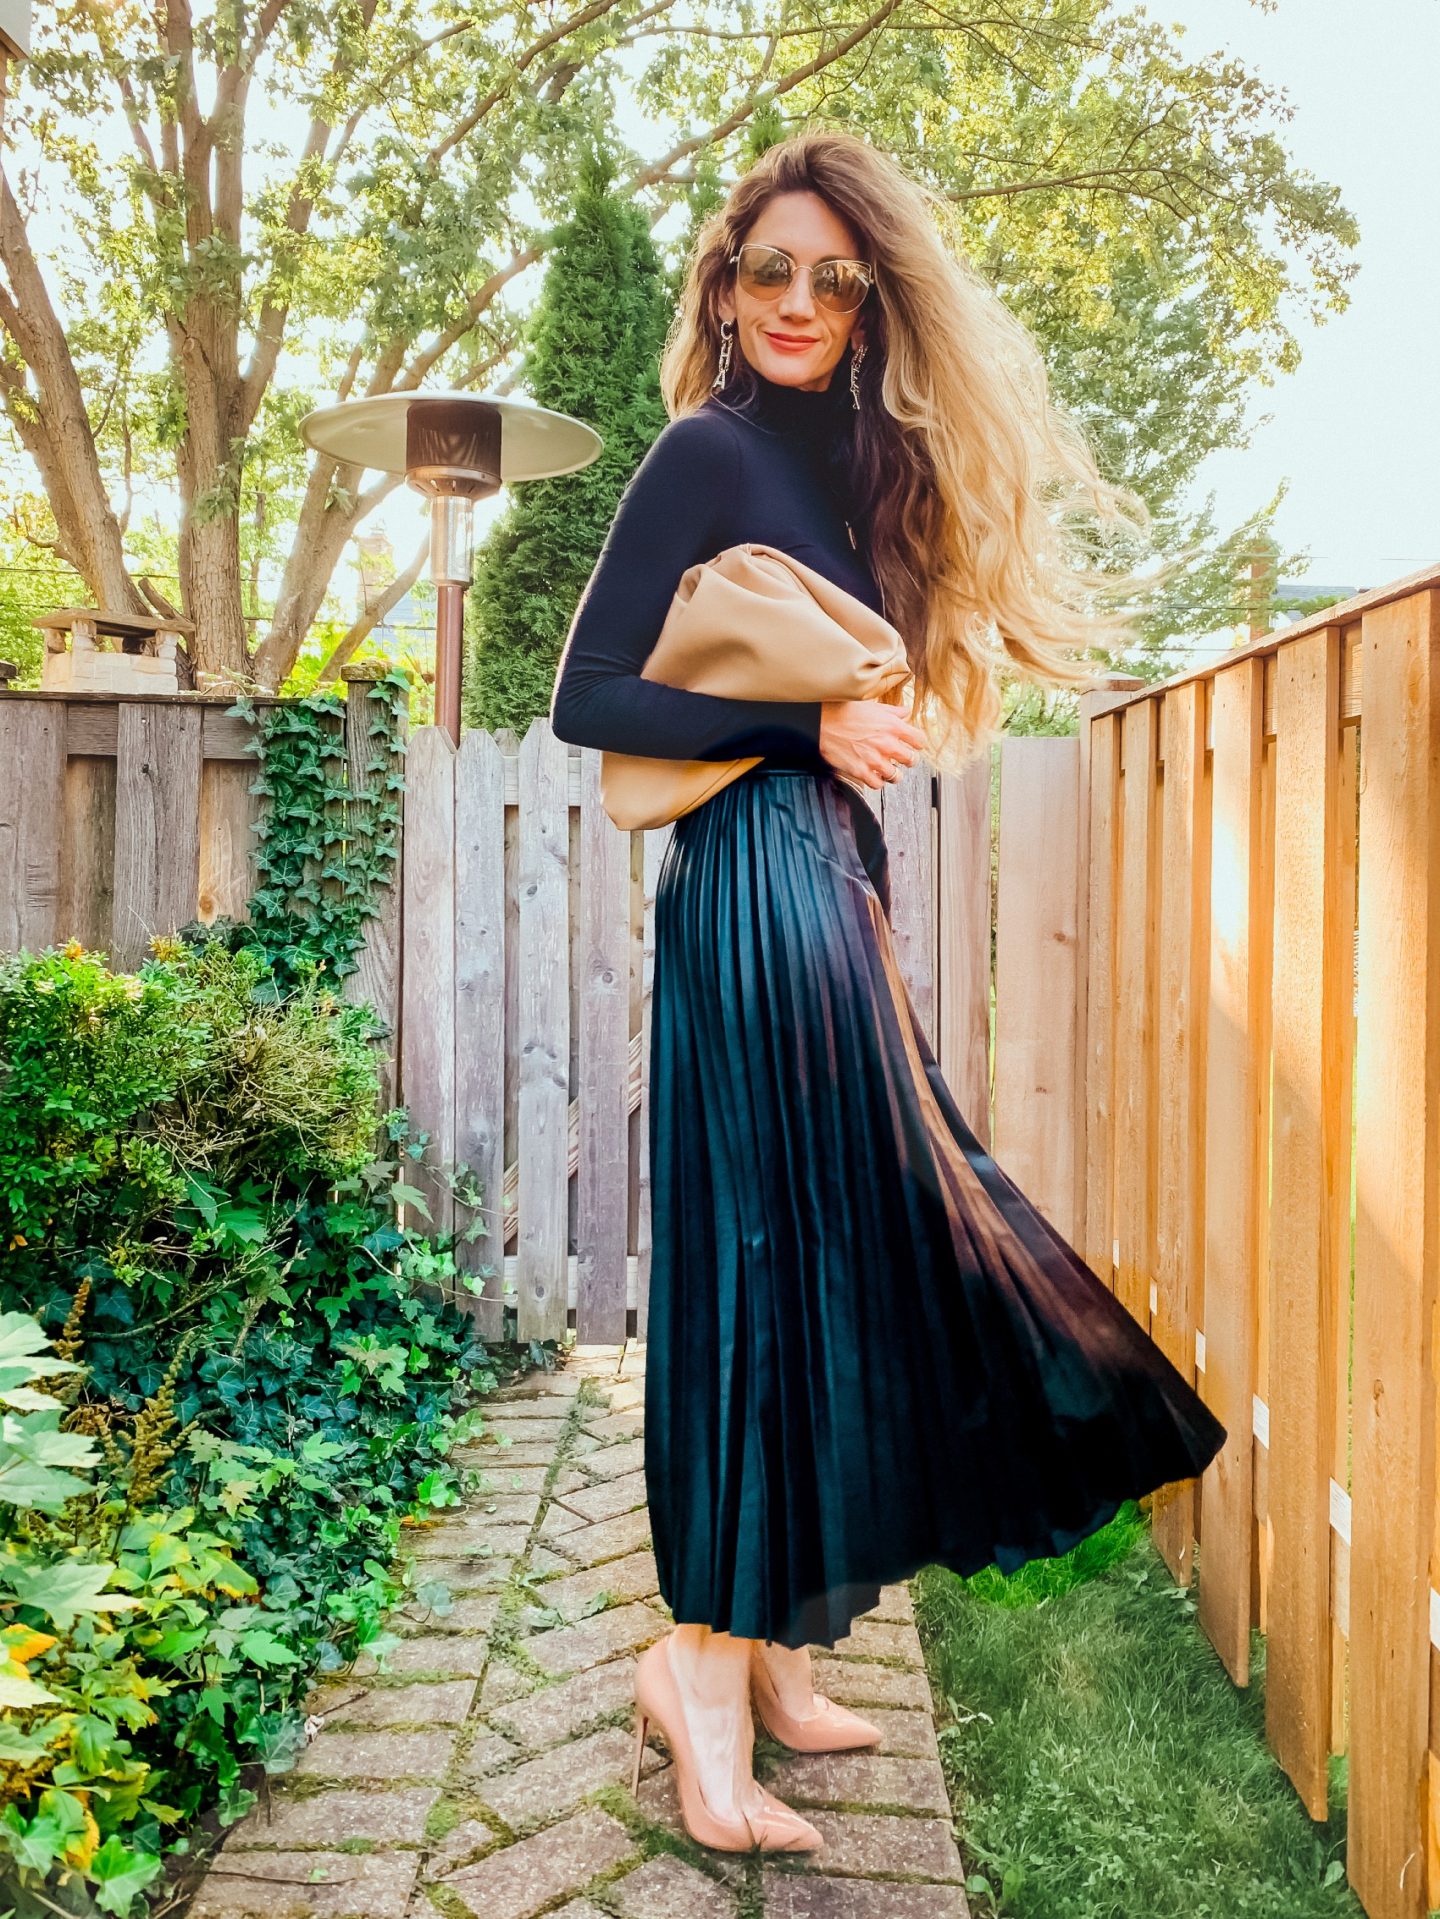 5 ways to style skirts  Chic outfits spring, Pleated skirt outfit, Black  skirt outfits